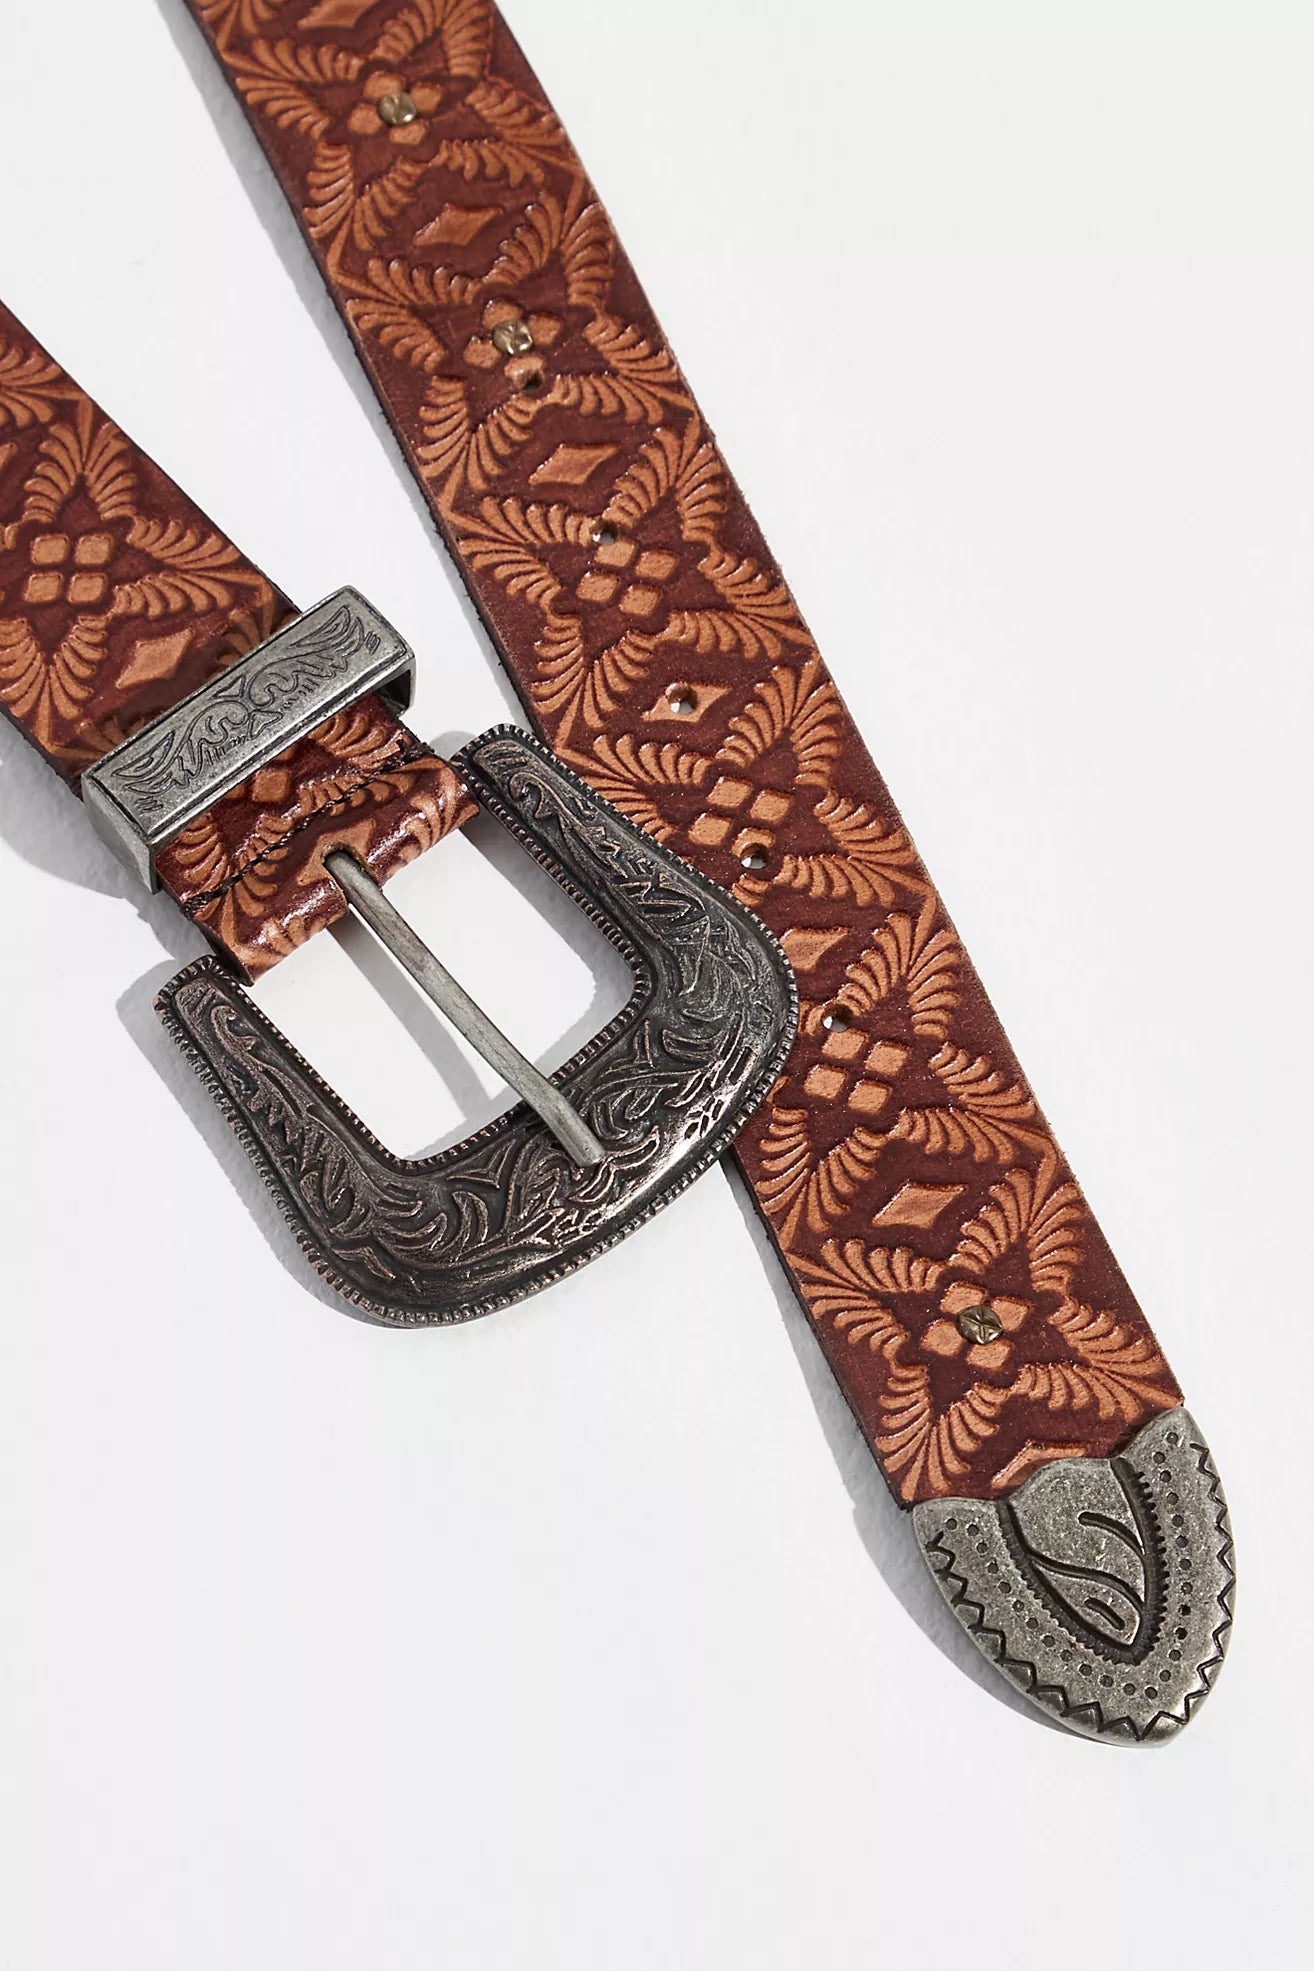 OUTLAW EMBOSSED BELT FREE PEOPLE